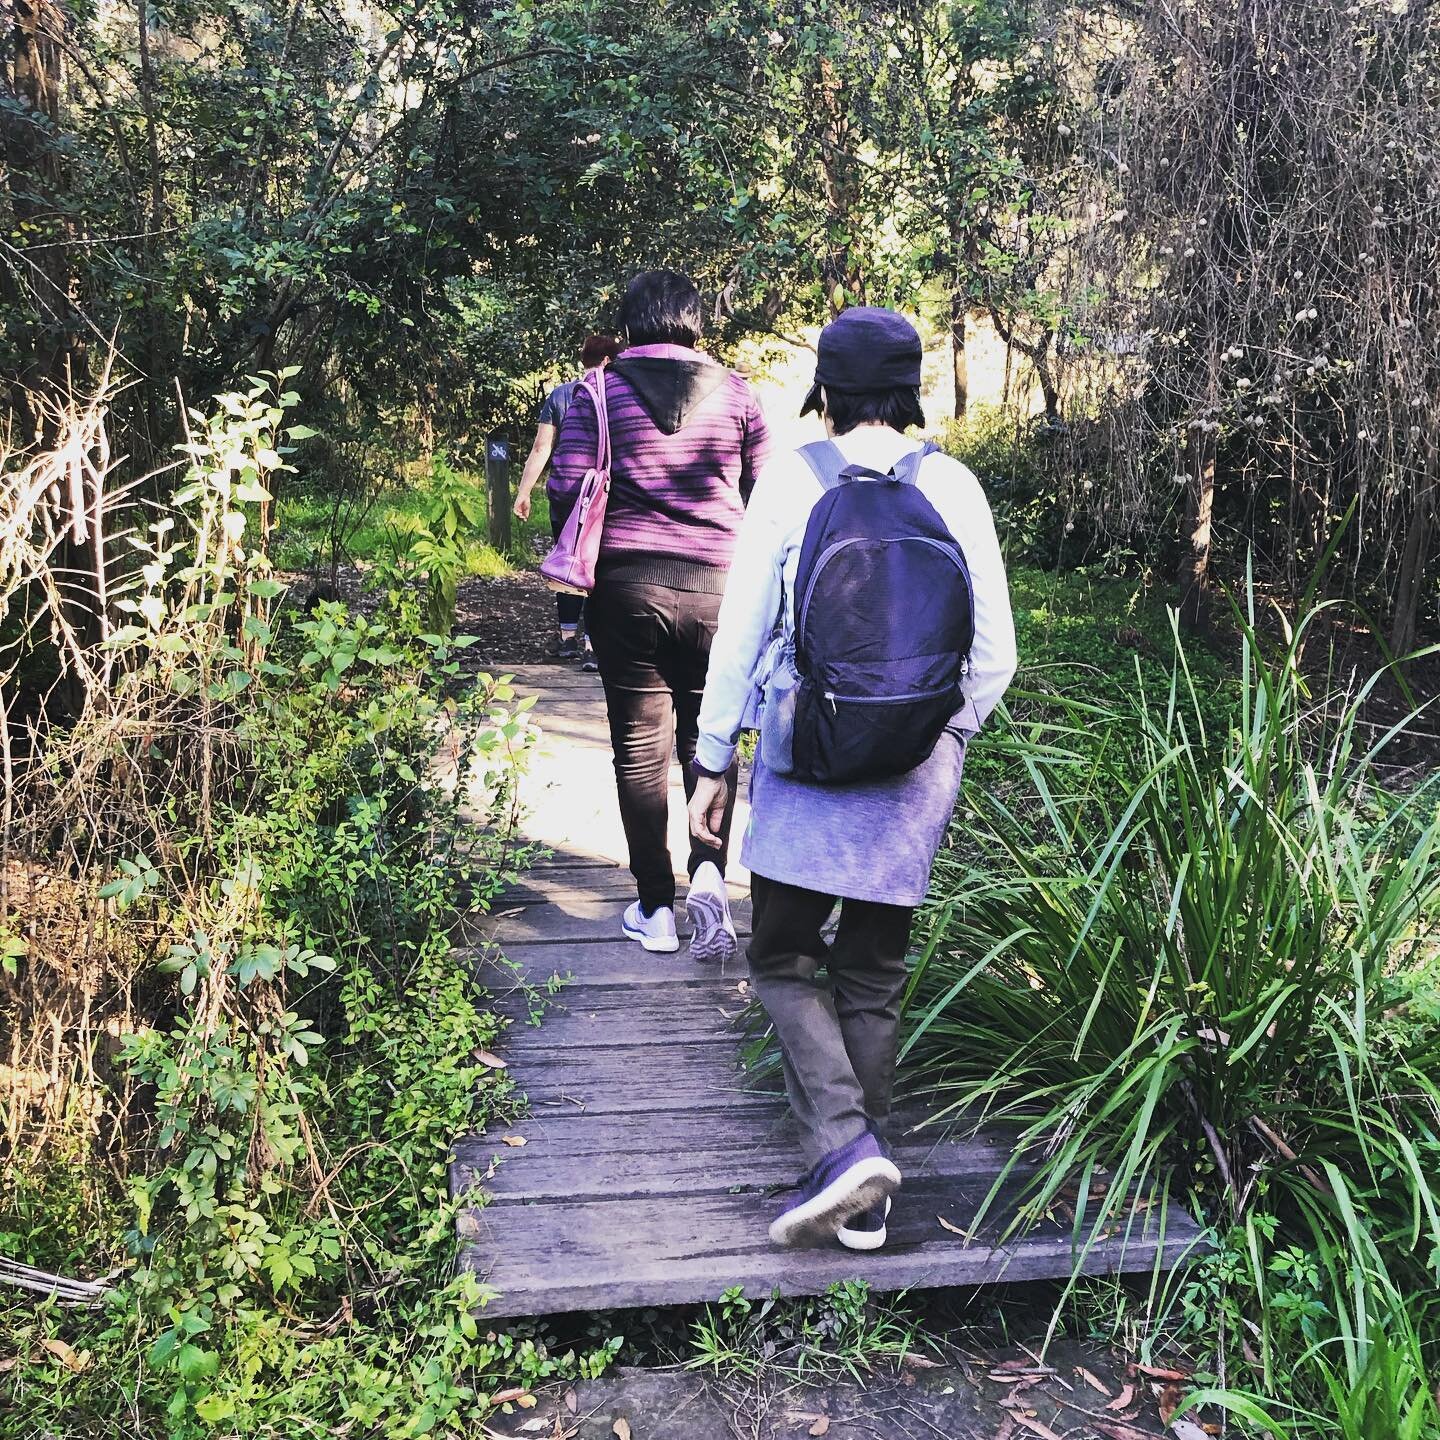 That&rsquo;s a wrap! Our discovery tour of Lane Cove National Park was the final event of MOVE Mac Park festival 2021. Ranger Steve from @nswnationalparks guided us through the beautiful bush lands right on the doorstep of Macquarie Park - so much to